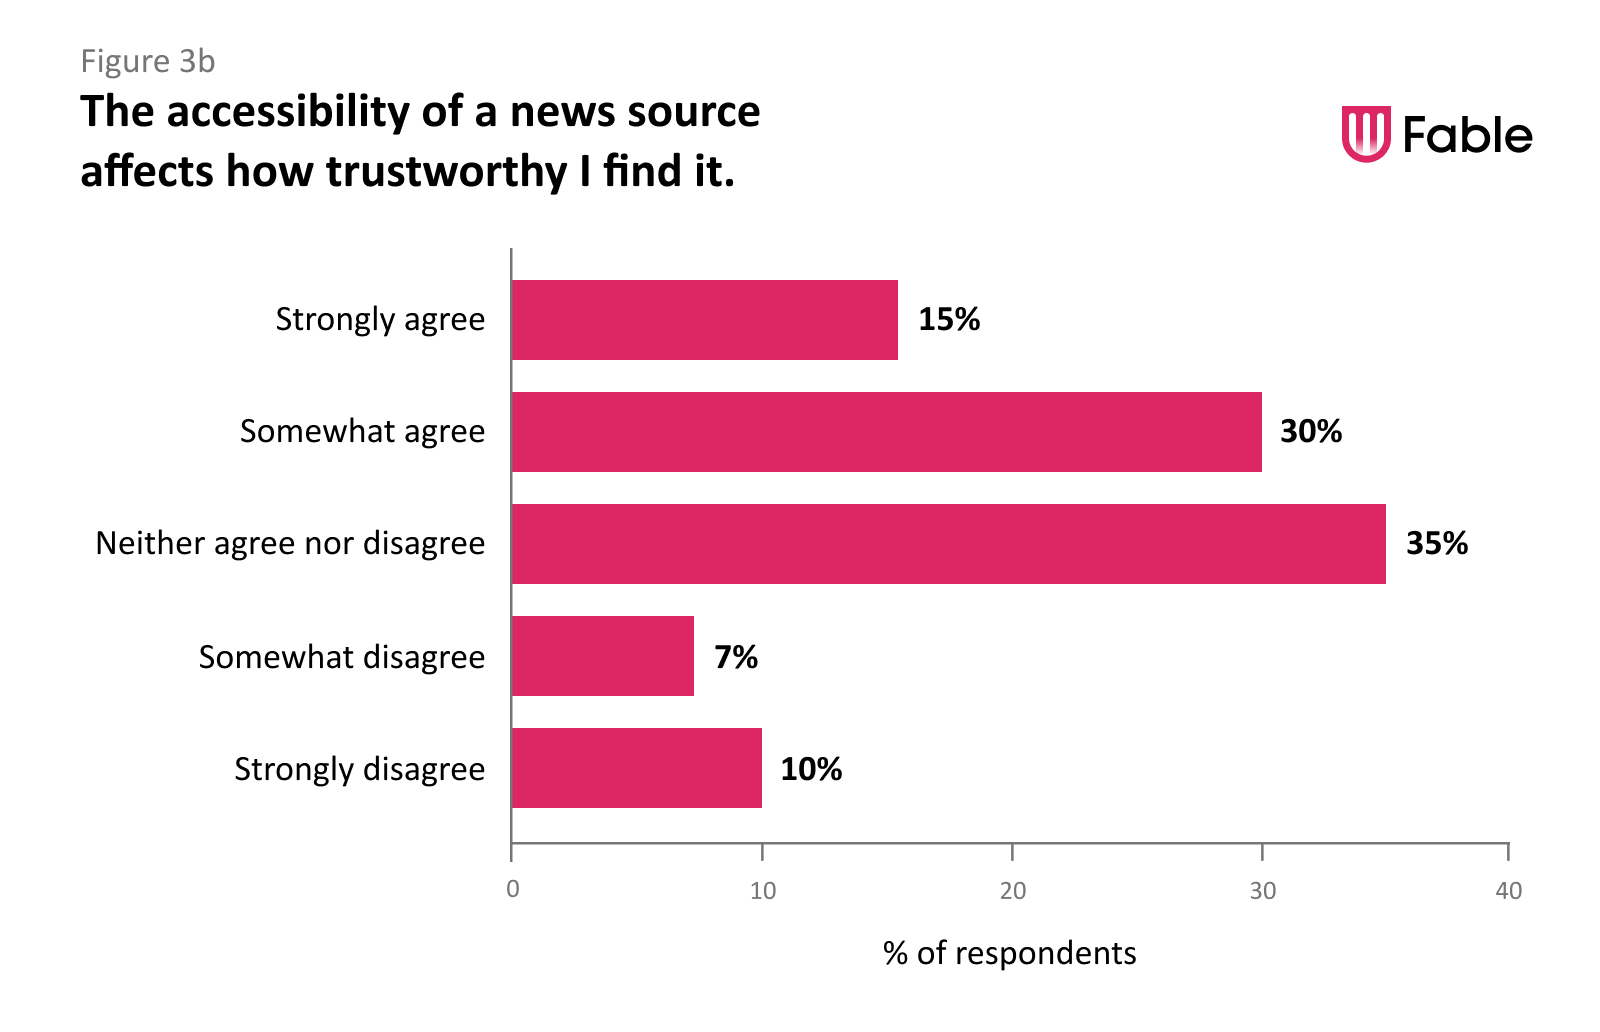 A bar-graph captioned “The accessibility of a news source affects how trustworthy I find it.” showing the following data: Strongly agree: 15% Somewhat agree: 30% Neither agree 'nor disagree: 35% Somewhat disagree: 7% Strongly disagree: 10%